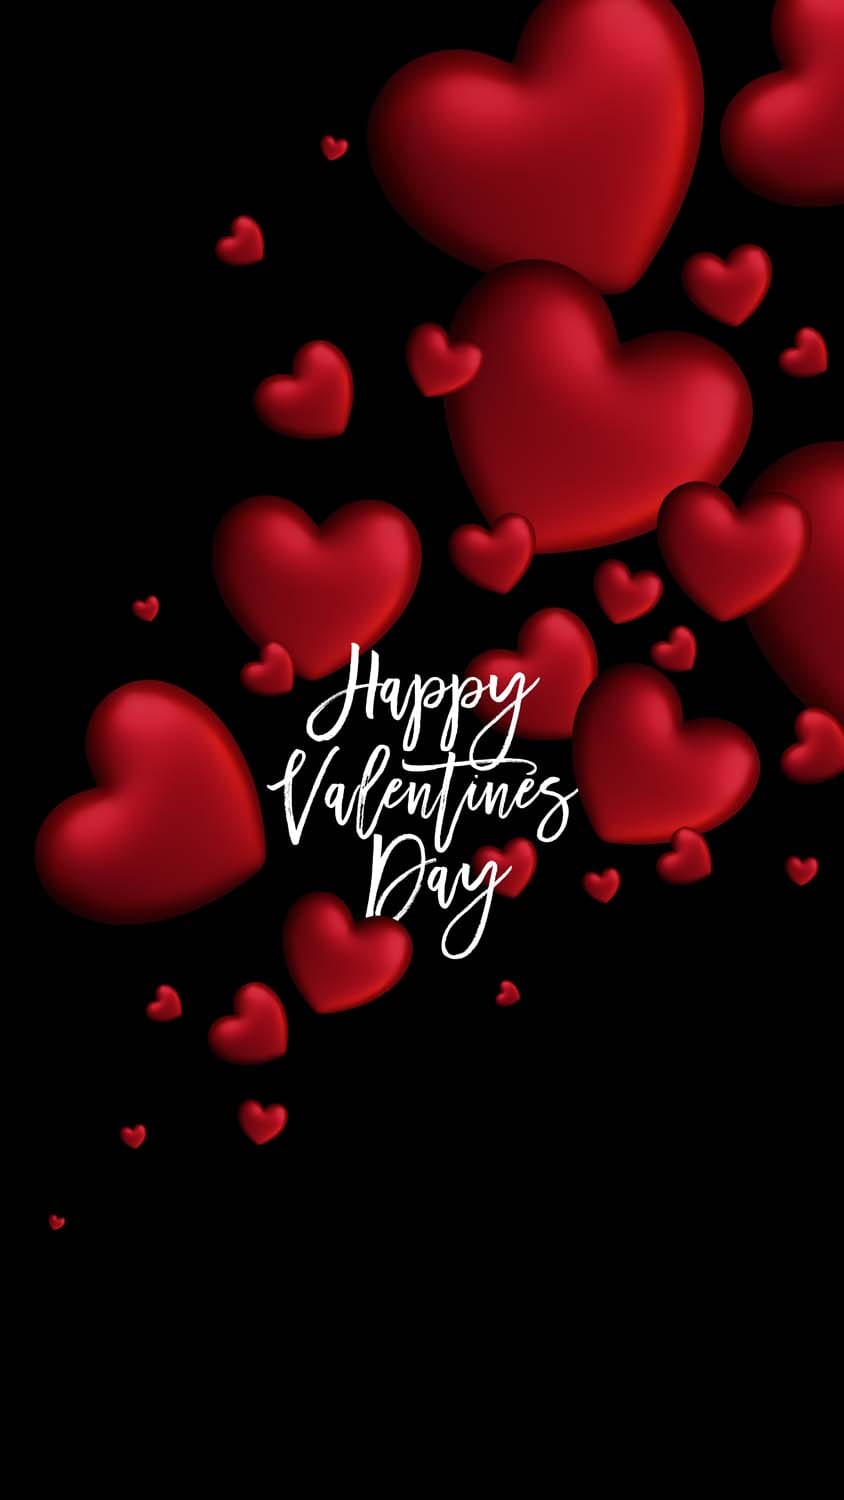 Happy Valentines Day IPhone Wallpaper HD  IPhone Wallpapers